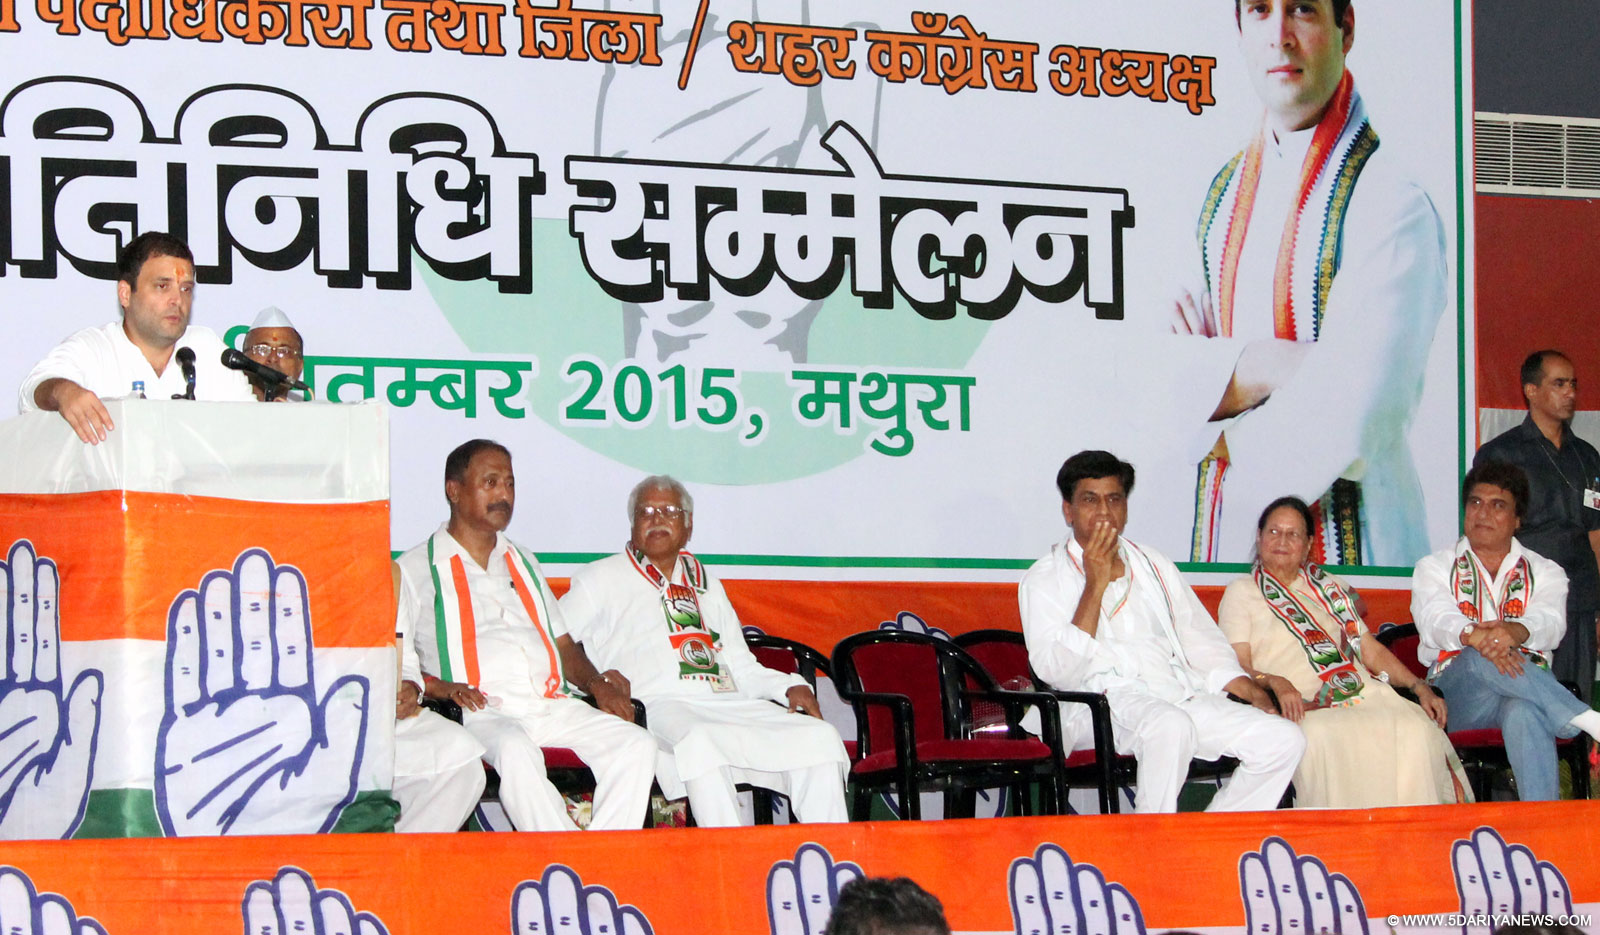 Congress vice president Rahul Gandhi addresses during a party rally in Mathura, on Sep 21, 2015.